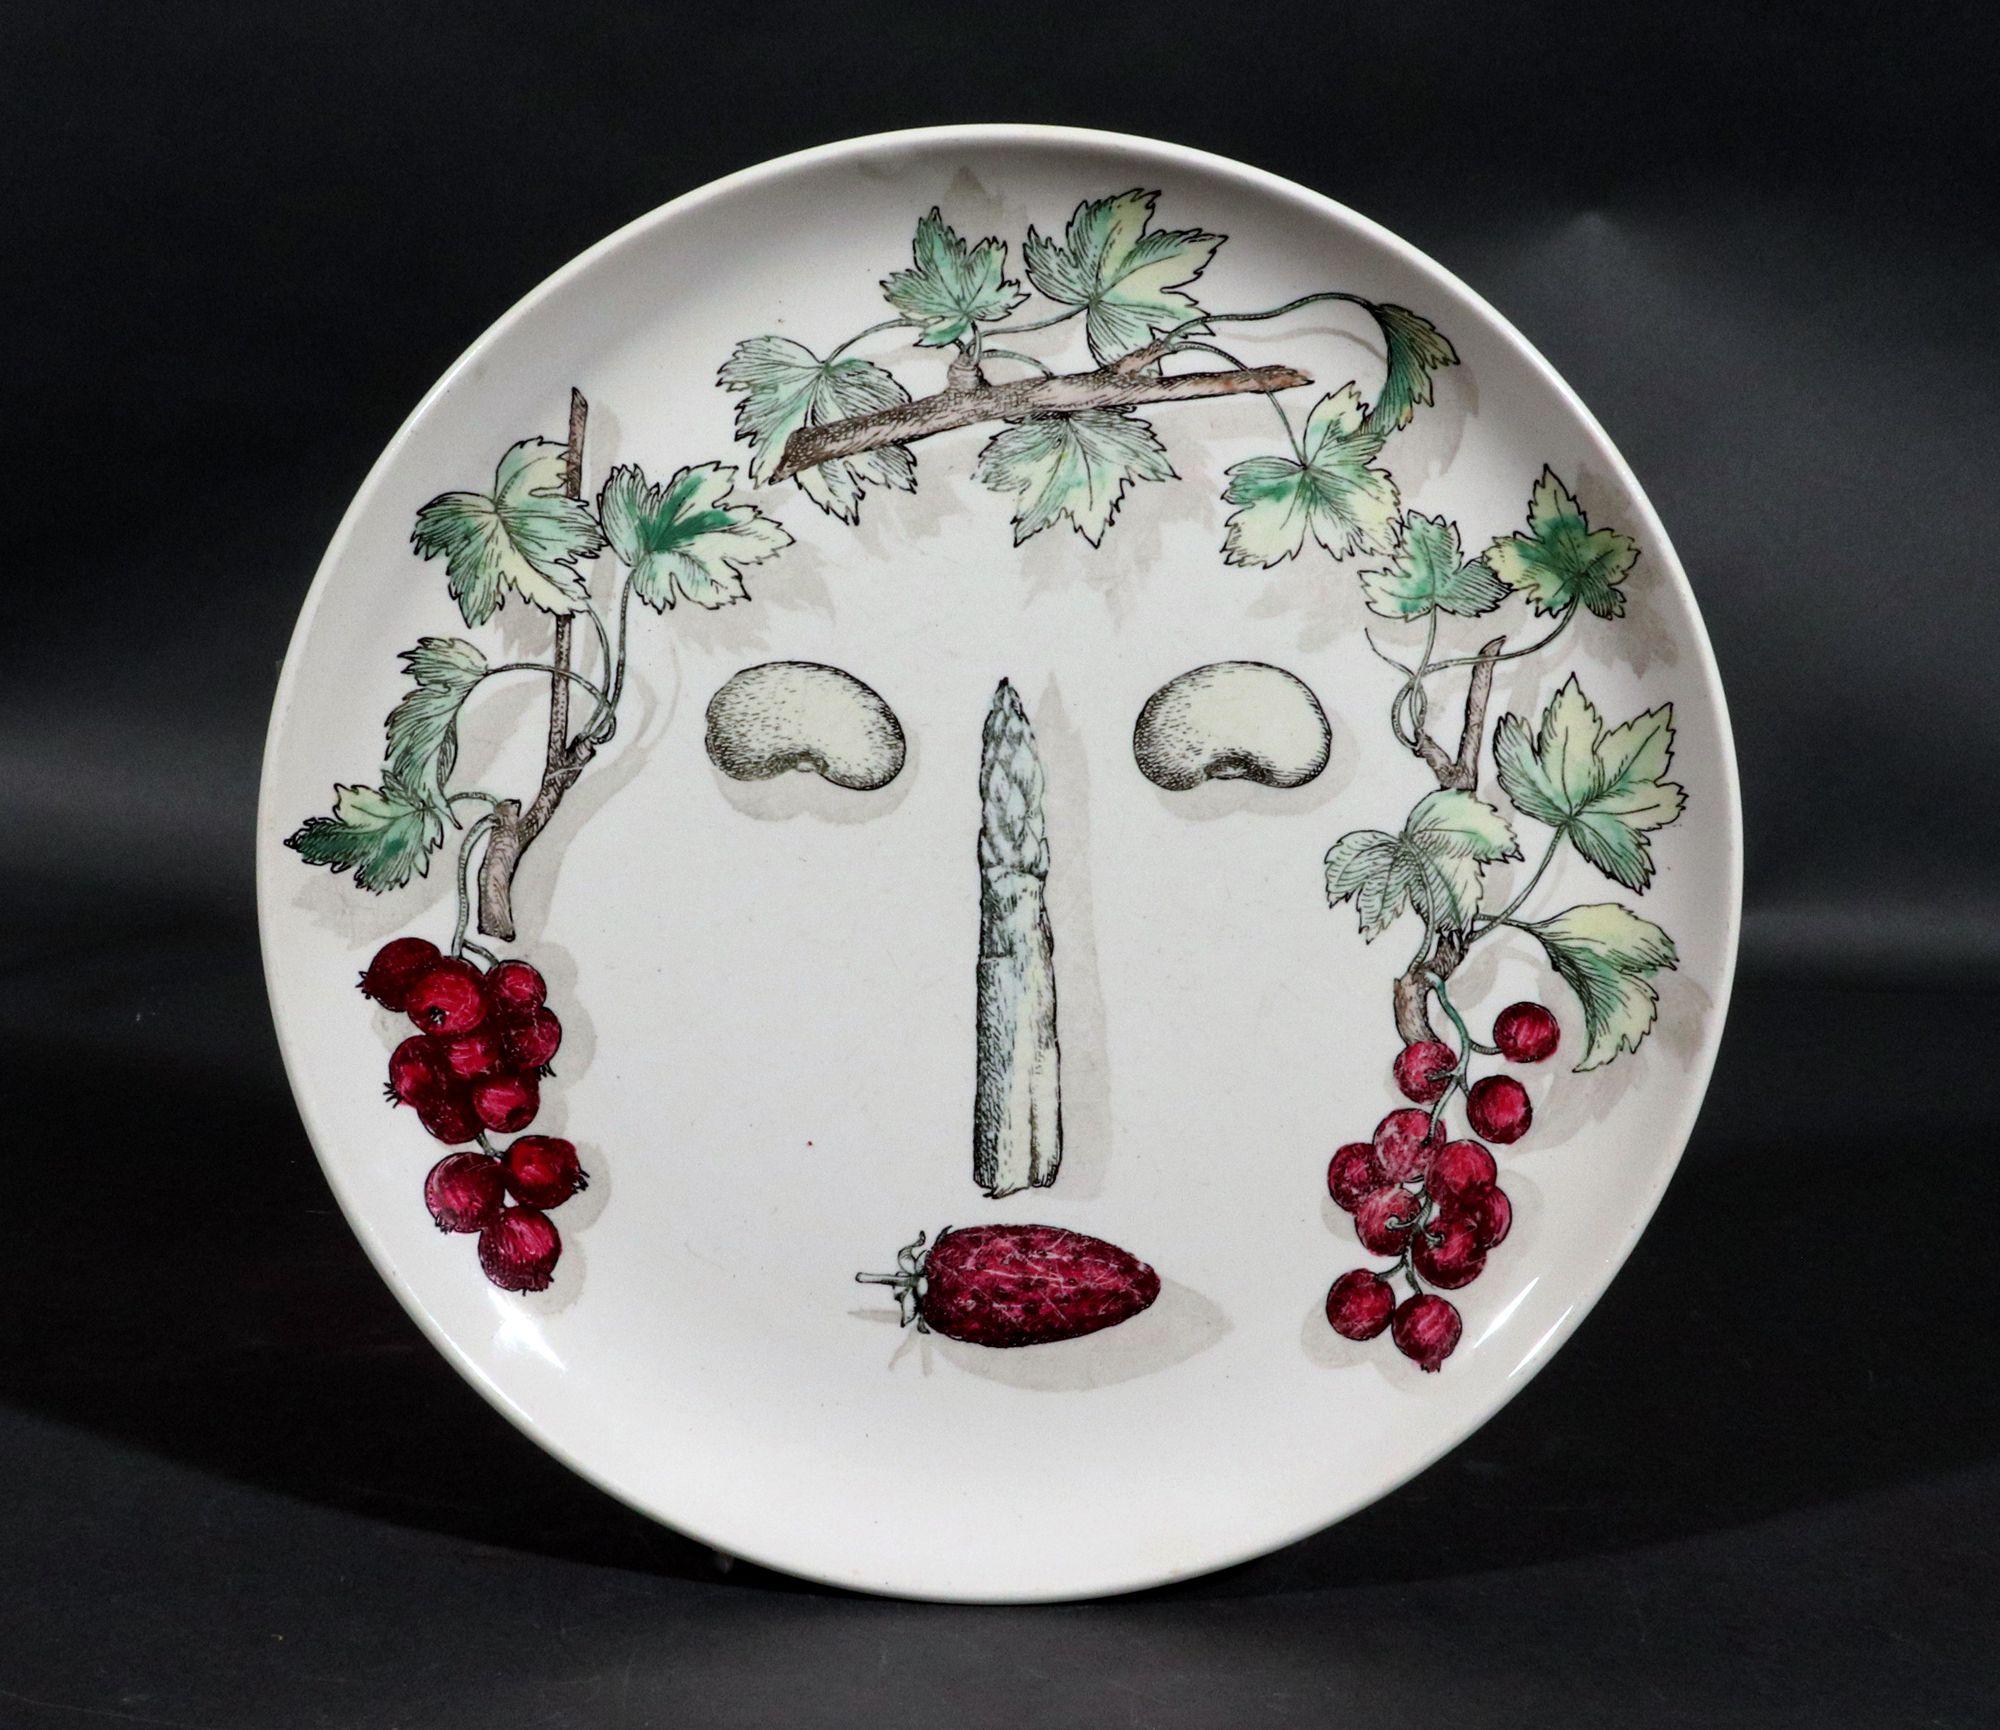 Piero Fornasetti Pottery Arcimboldesca Vegetable Face Plate,
After Giuseppe Arcimboldo,
Number 12,
Circa 1960's.

The pottery plates are after Giuseppe Arcimboldo-the design of a face creatively designed with the use of various vegetables and